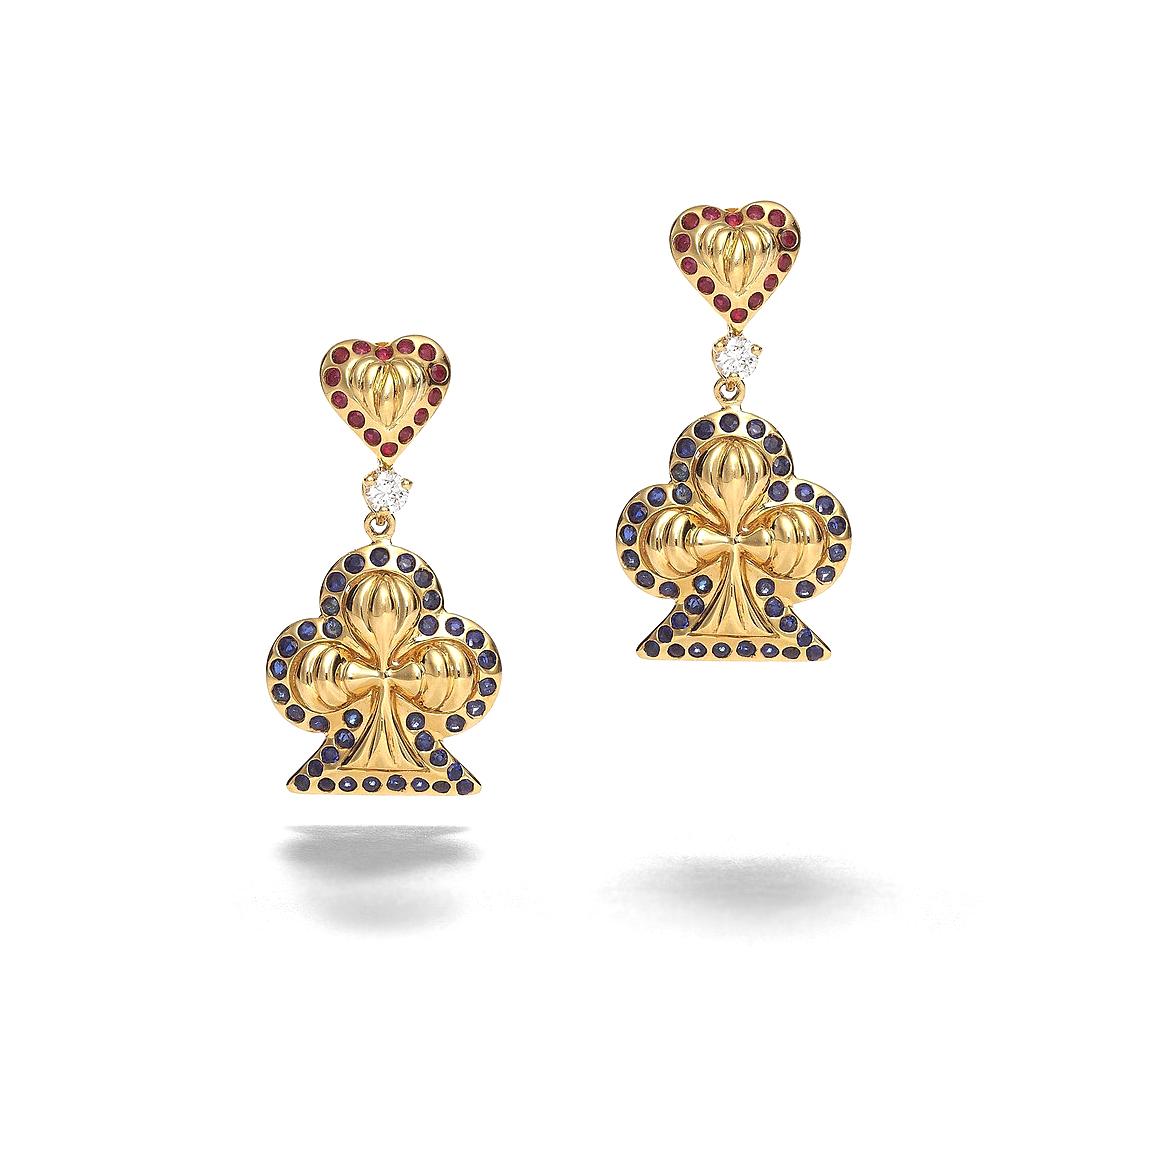 Earrings in 18kt yellow gold set with 2 diamonds 0.15 cts and sapphires and rubies 1.33 cts